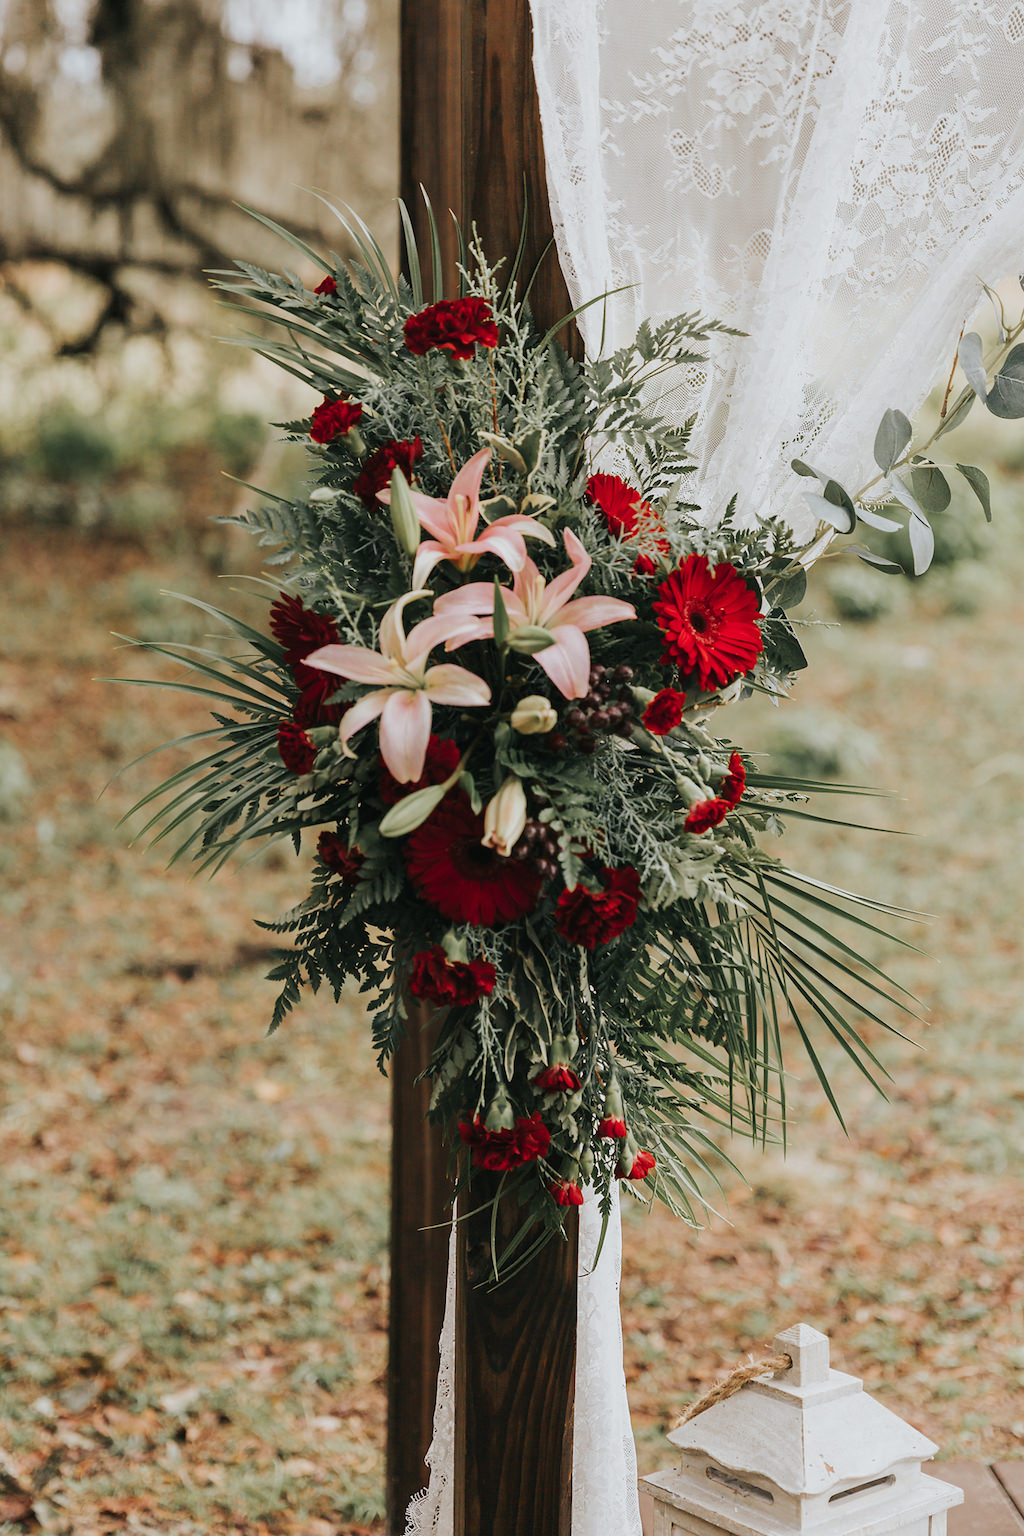 Rich Red and Blush Pink Floral Arrangement with Greenery Against Wooden Tampa Bay Ceremony Arch